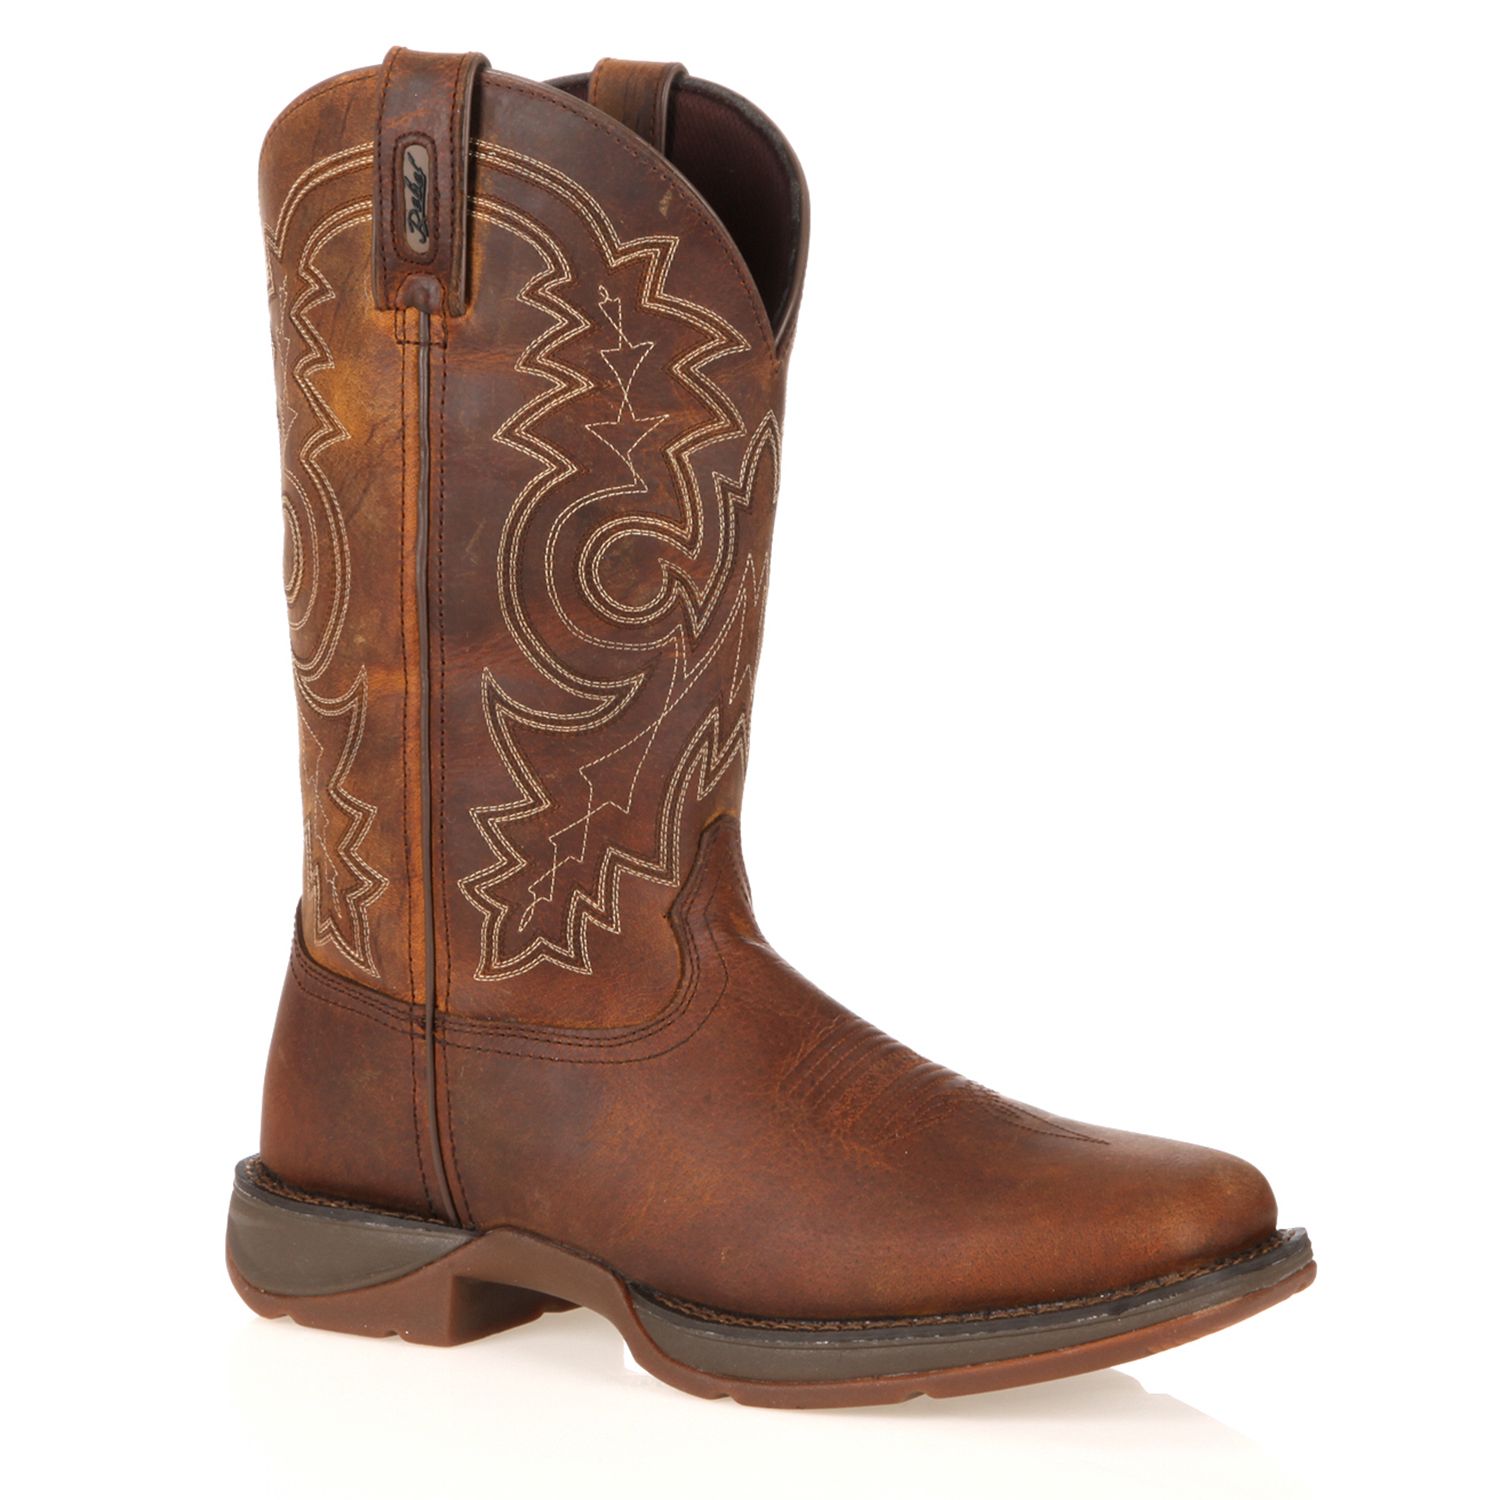 Image for Durango Rebel Men's 11-in. Steel-Toe Western Boots at Kohl's.